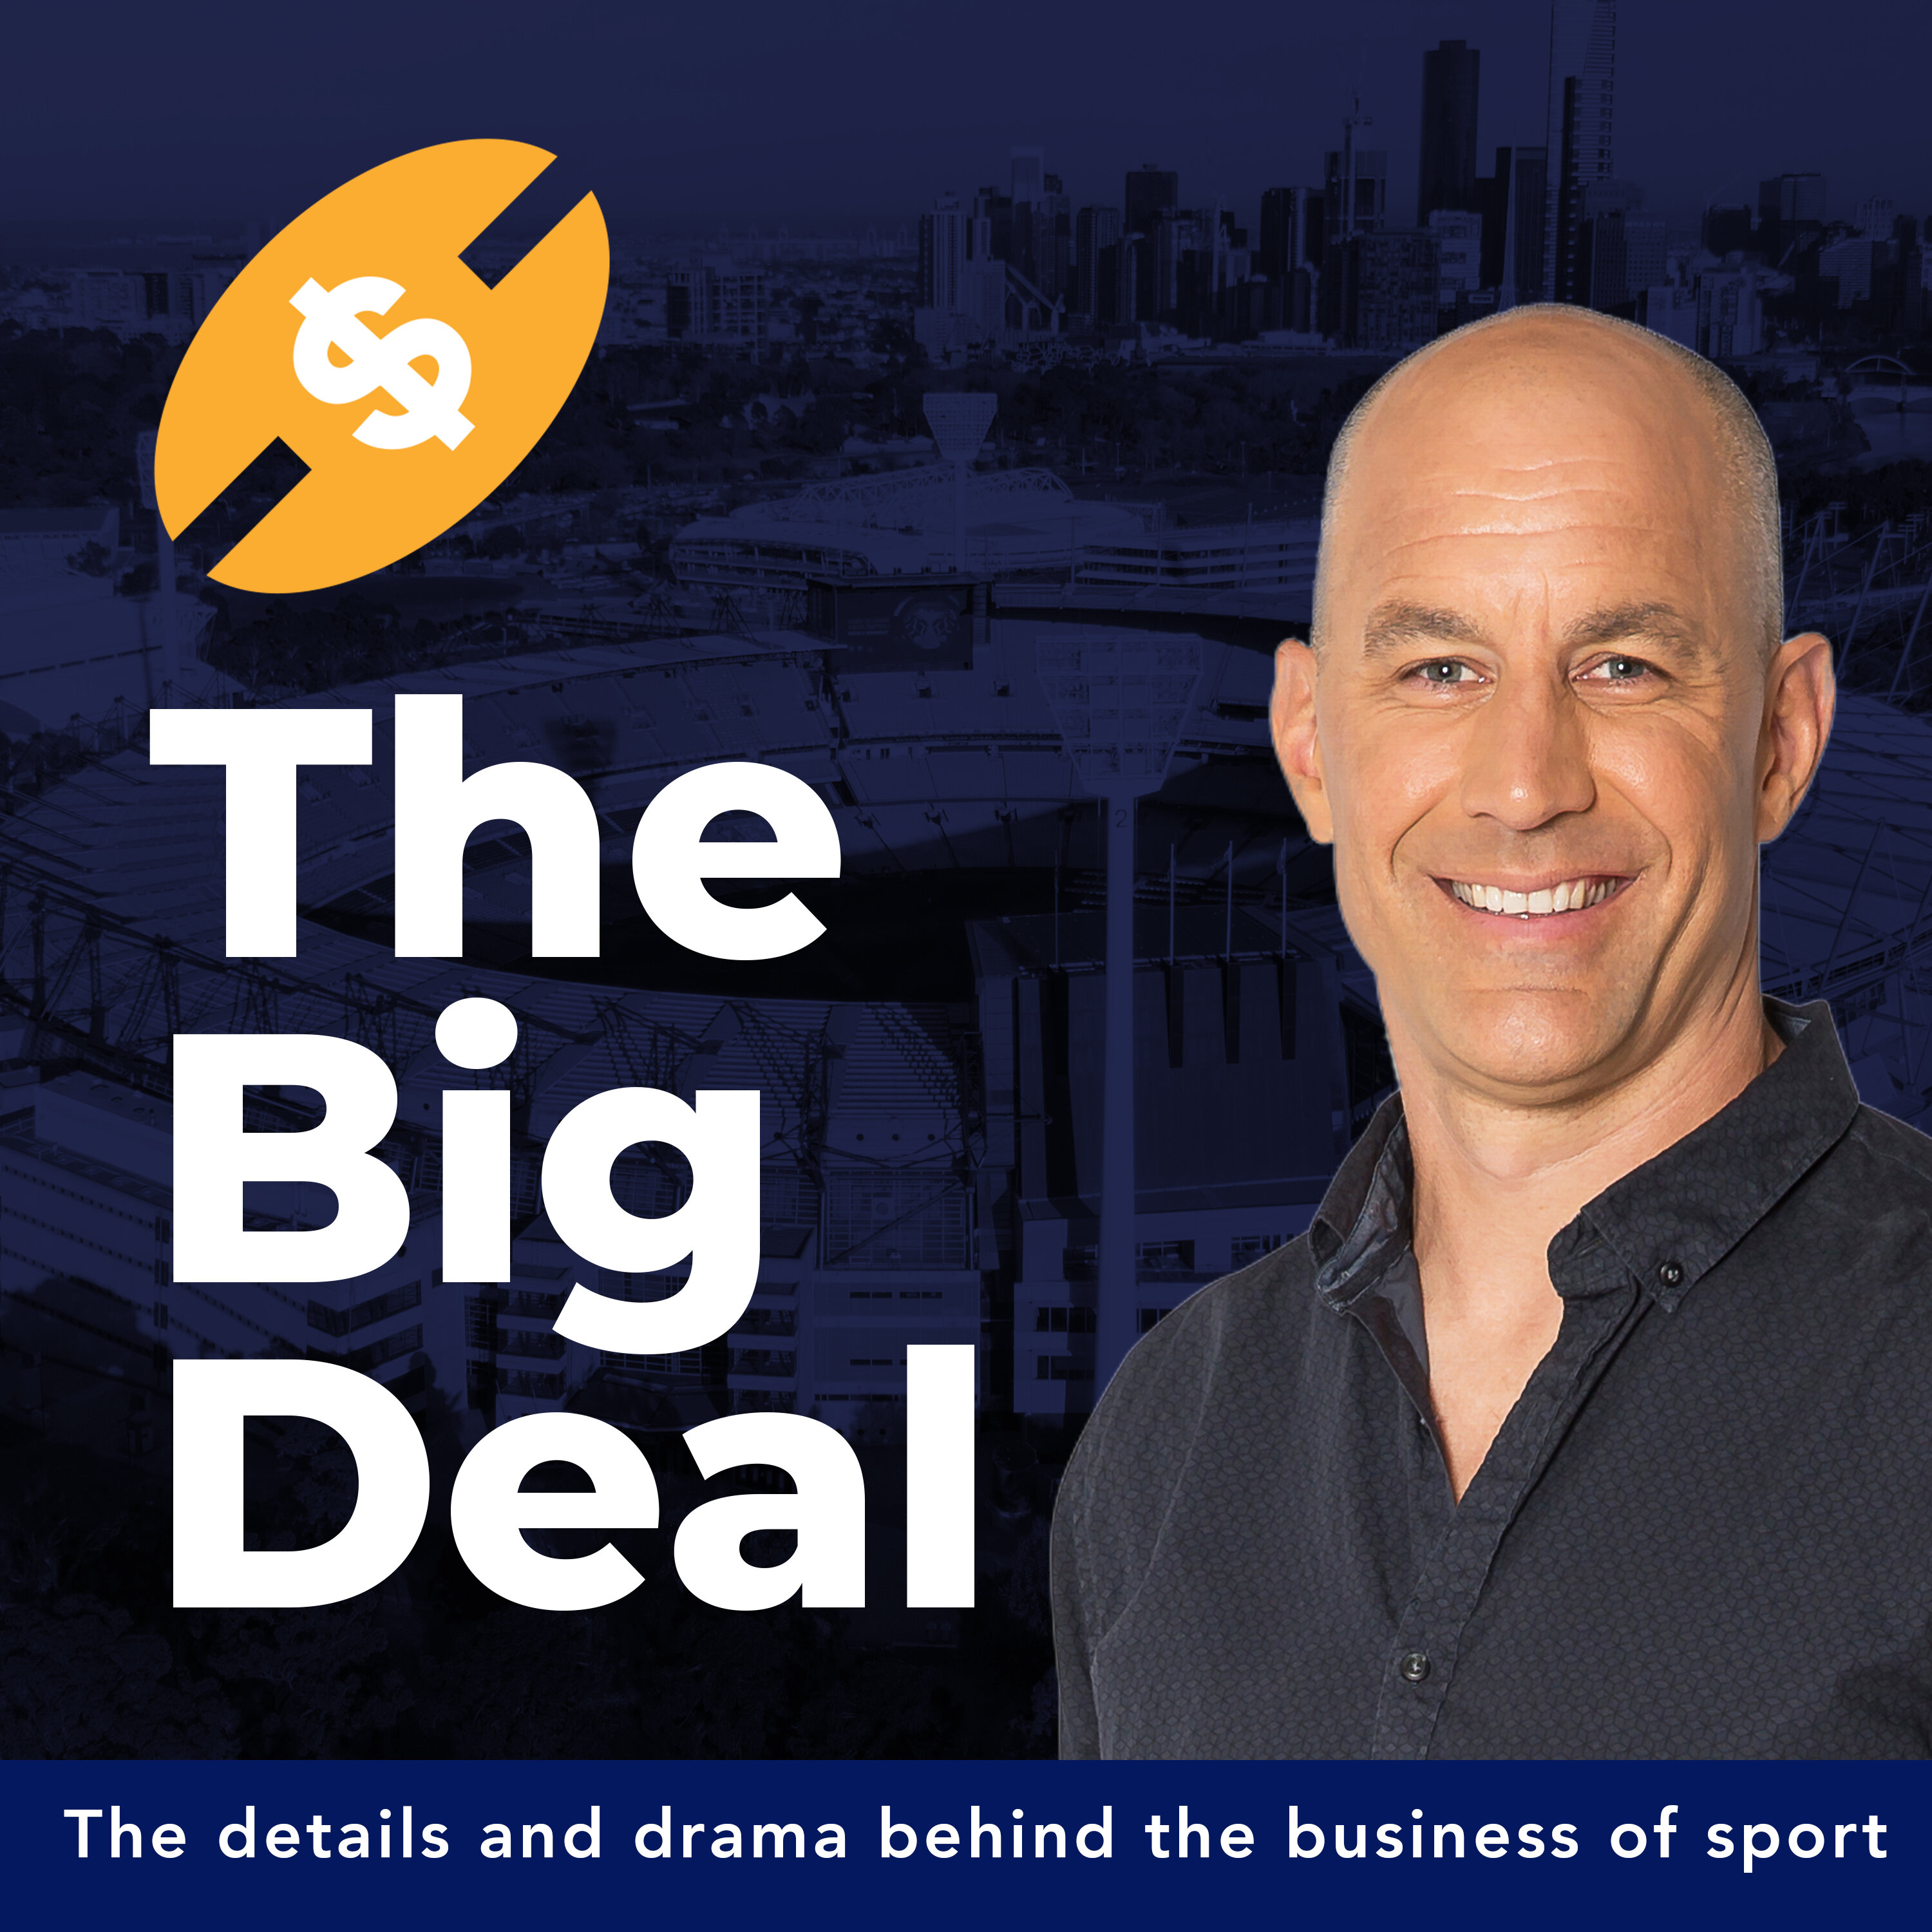 Sports Biz Wrap: AFL season build-up, Webster's suspension, Matildas in Adelaide, NRL in Vegas, Aussies on the move in NBA, Goorjian set for Kings, the Caitlin Clark effect & more